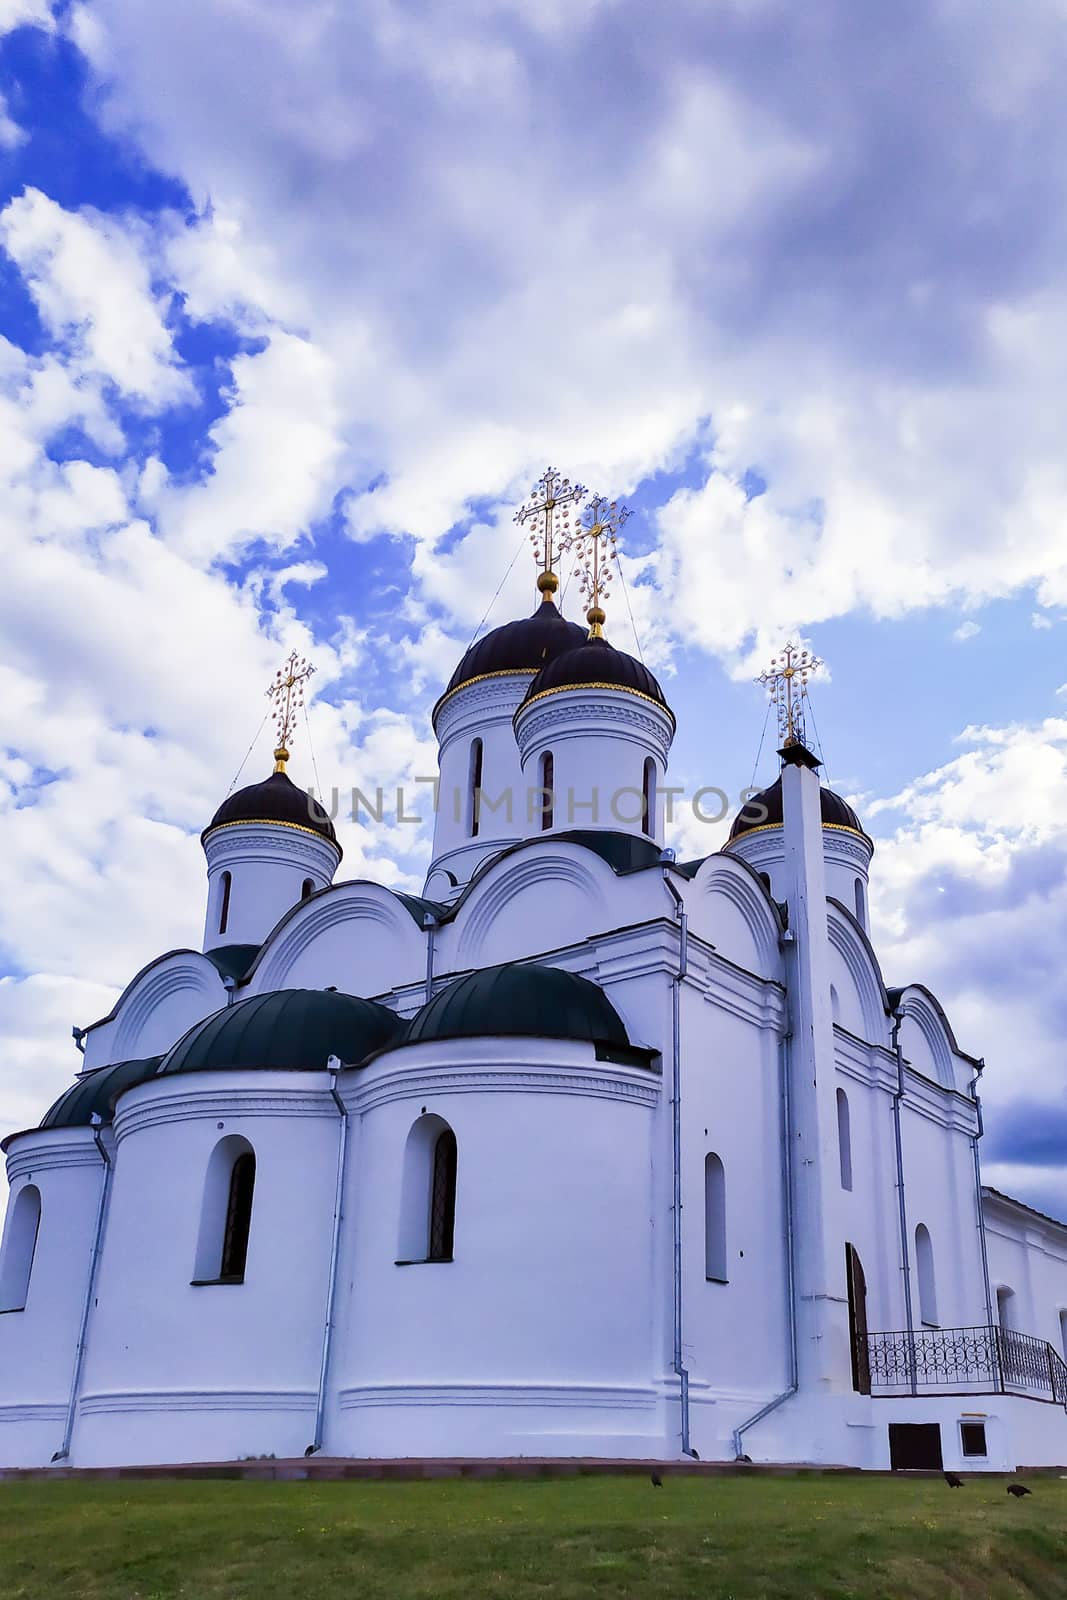 Ancient white Stone Orthodox Church with dark domes and Golden crosses by bonilook